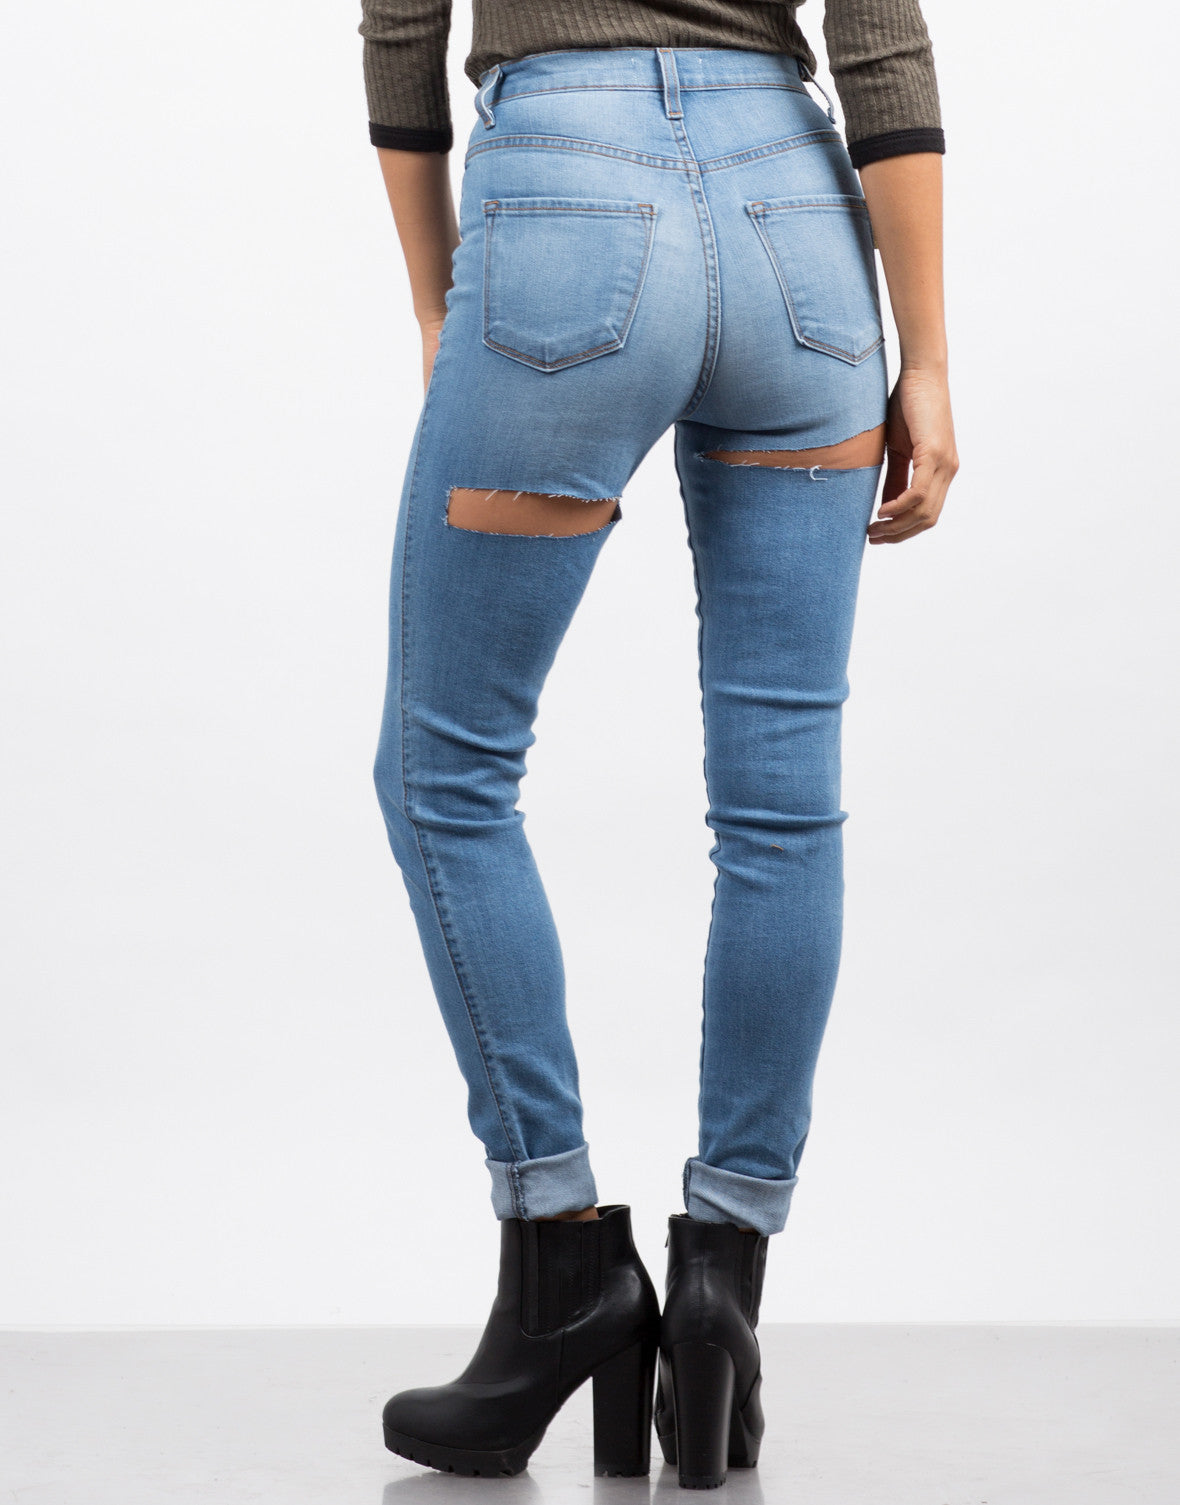 jeans with back cut out